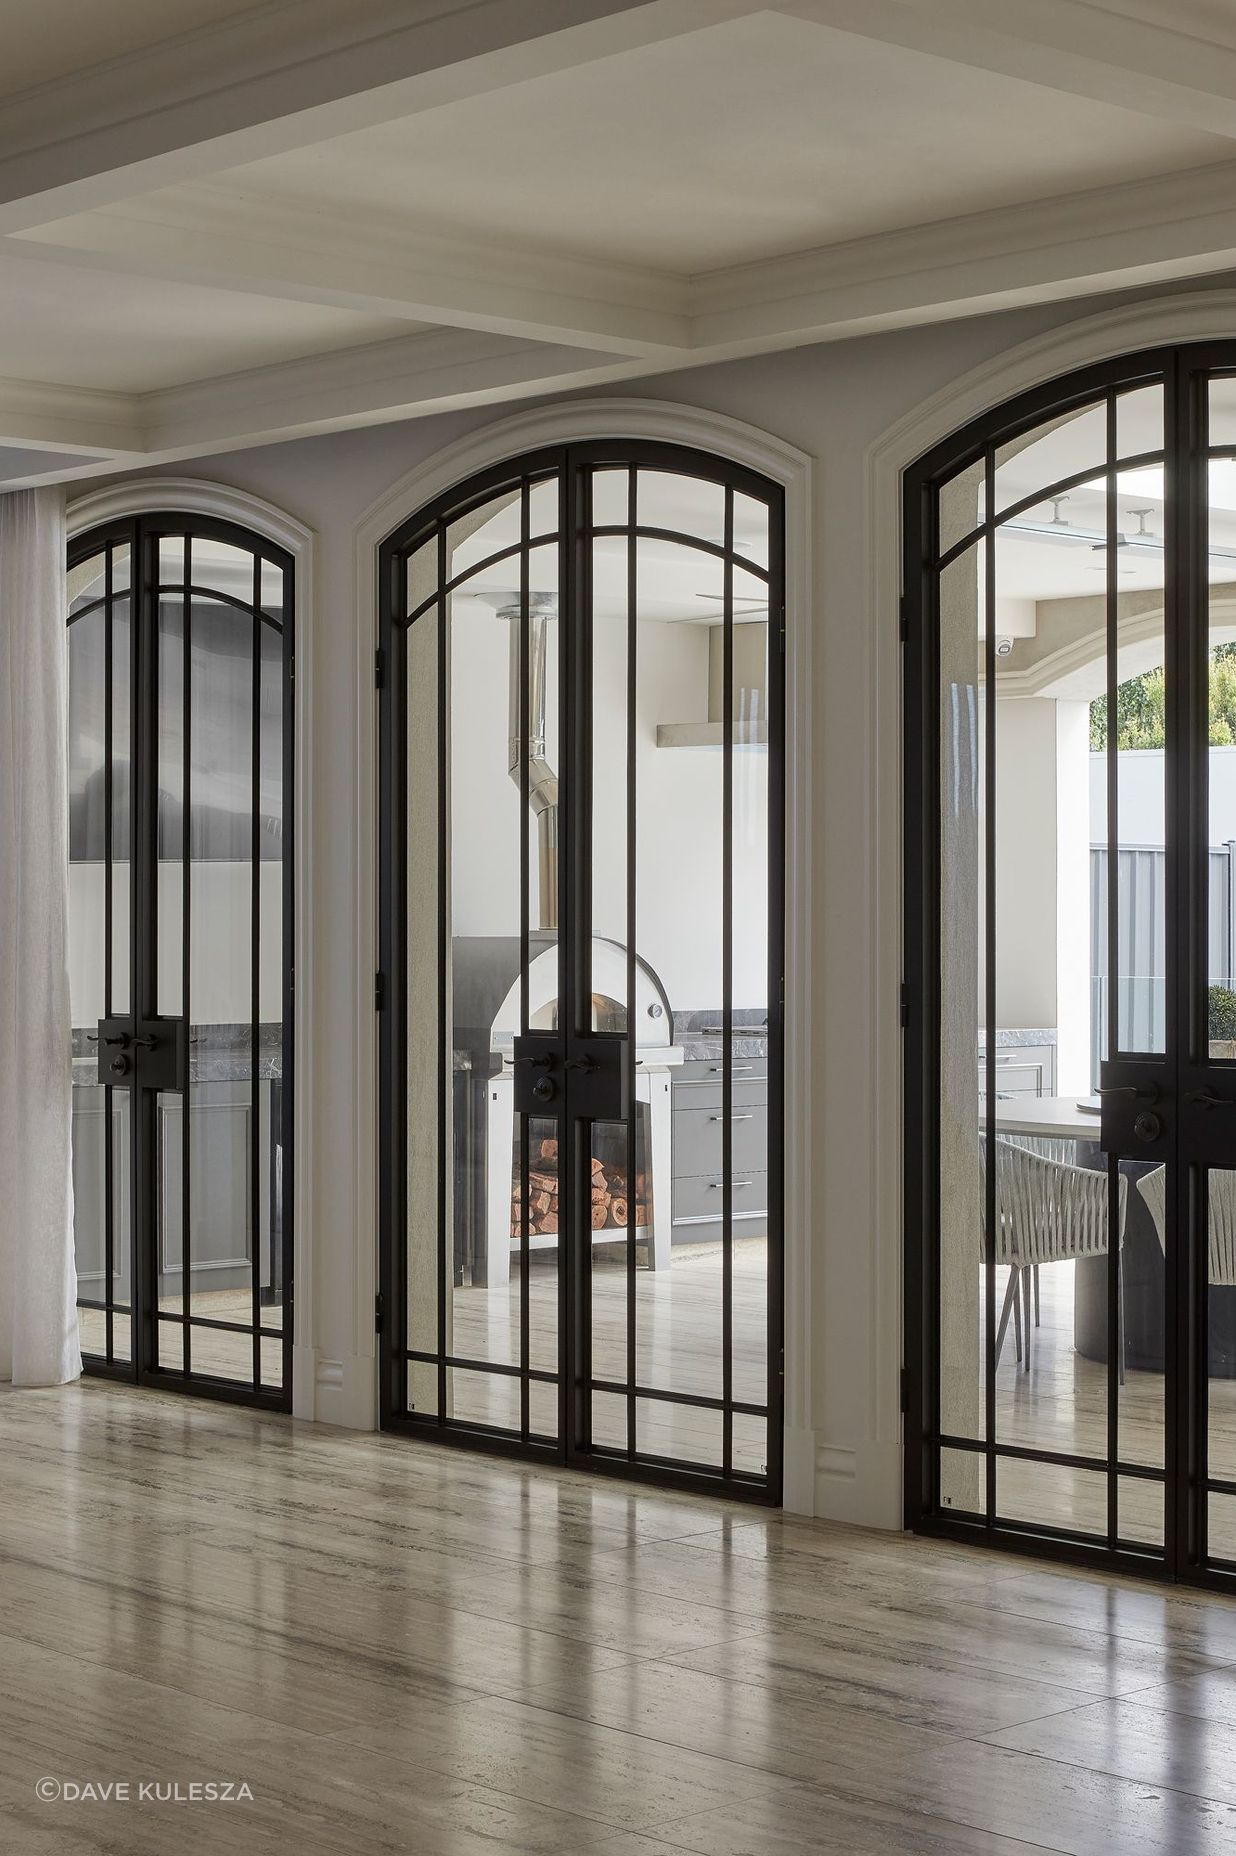 Steel's strength and non-combustible nature make steel doors fire-resistant.